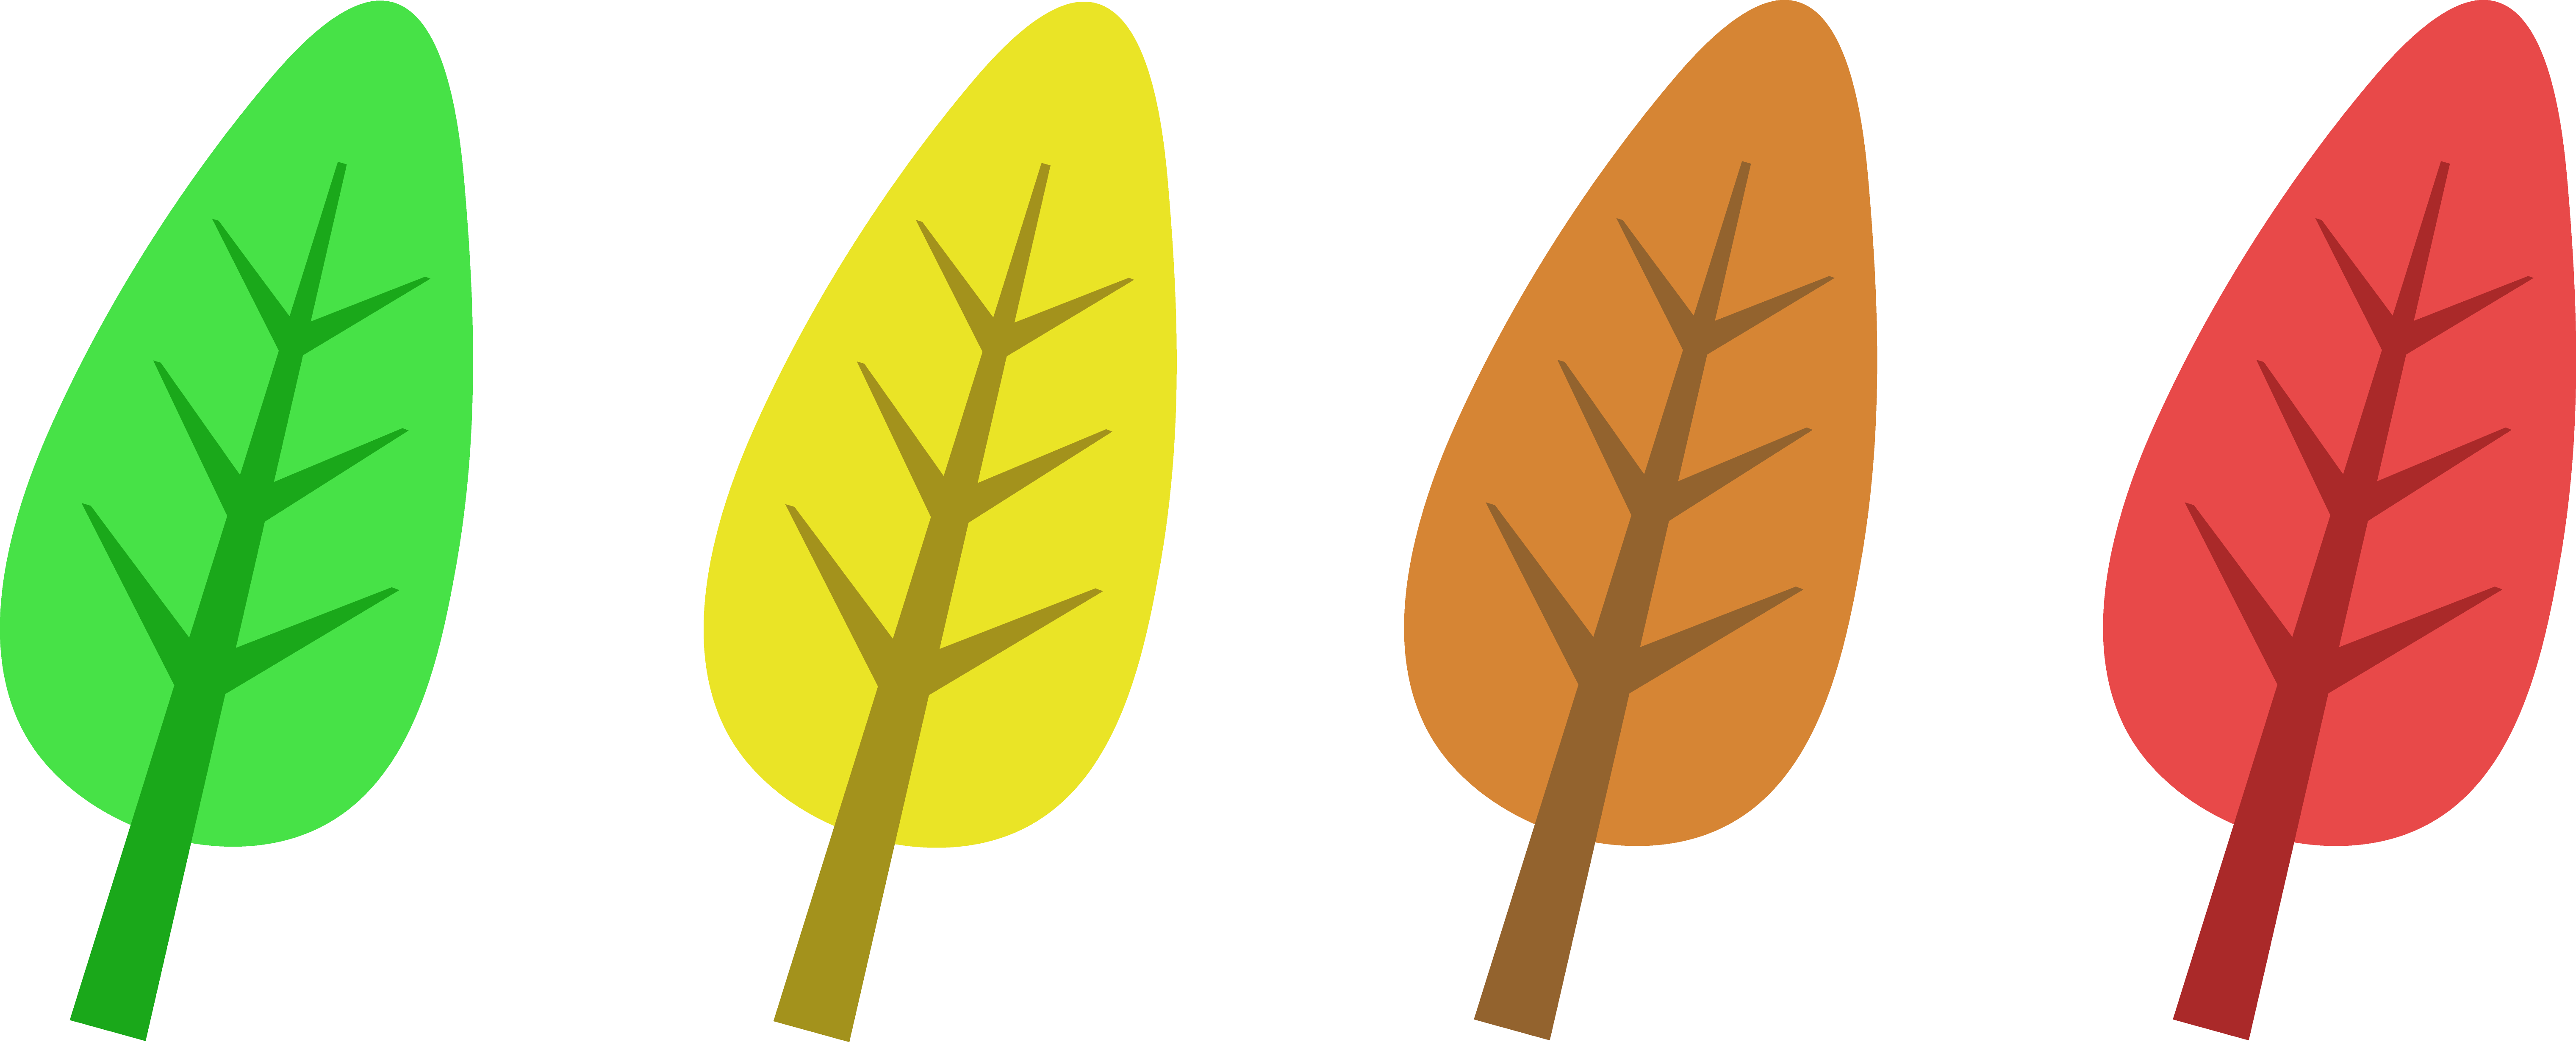 leaf clipart - Clip Art Of Leaves